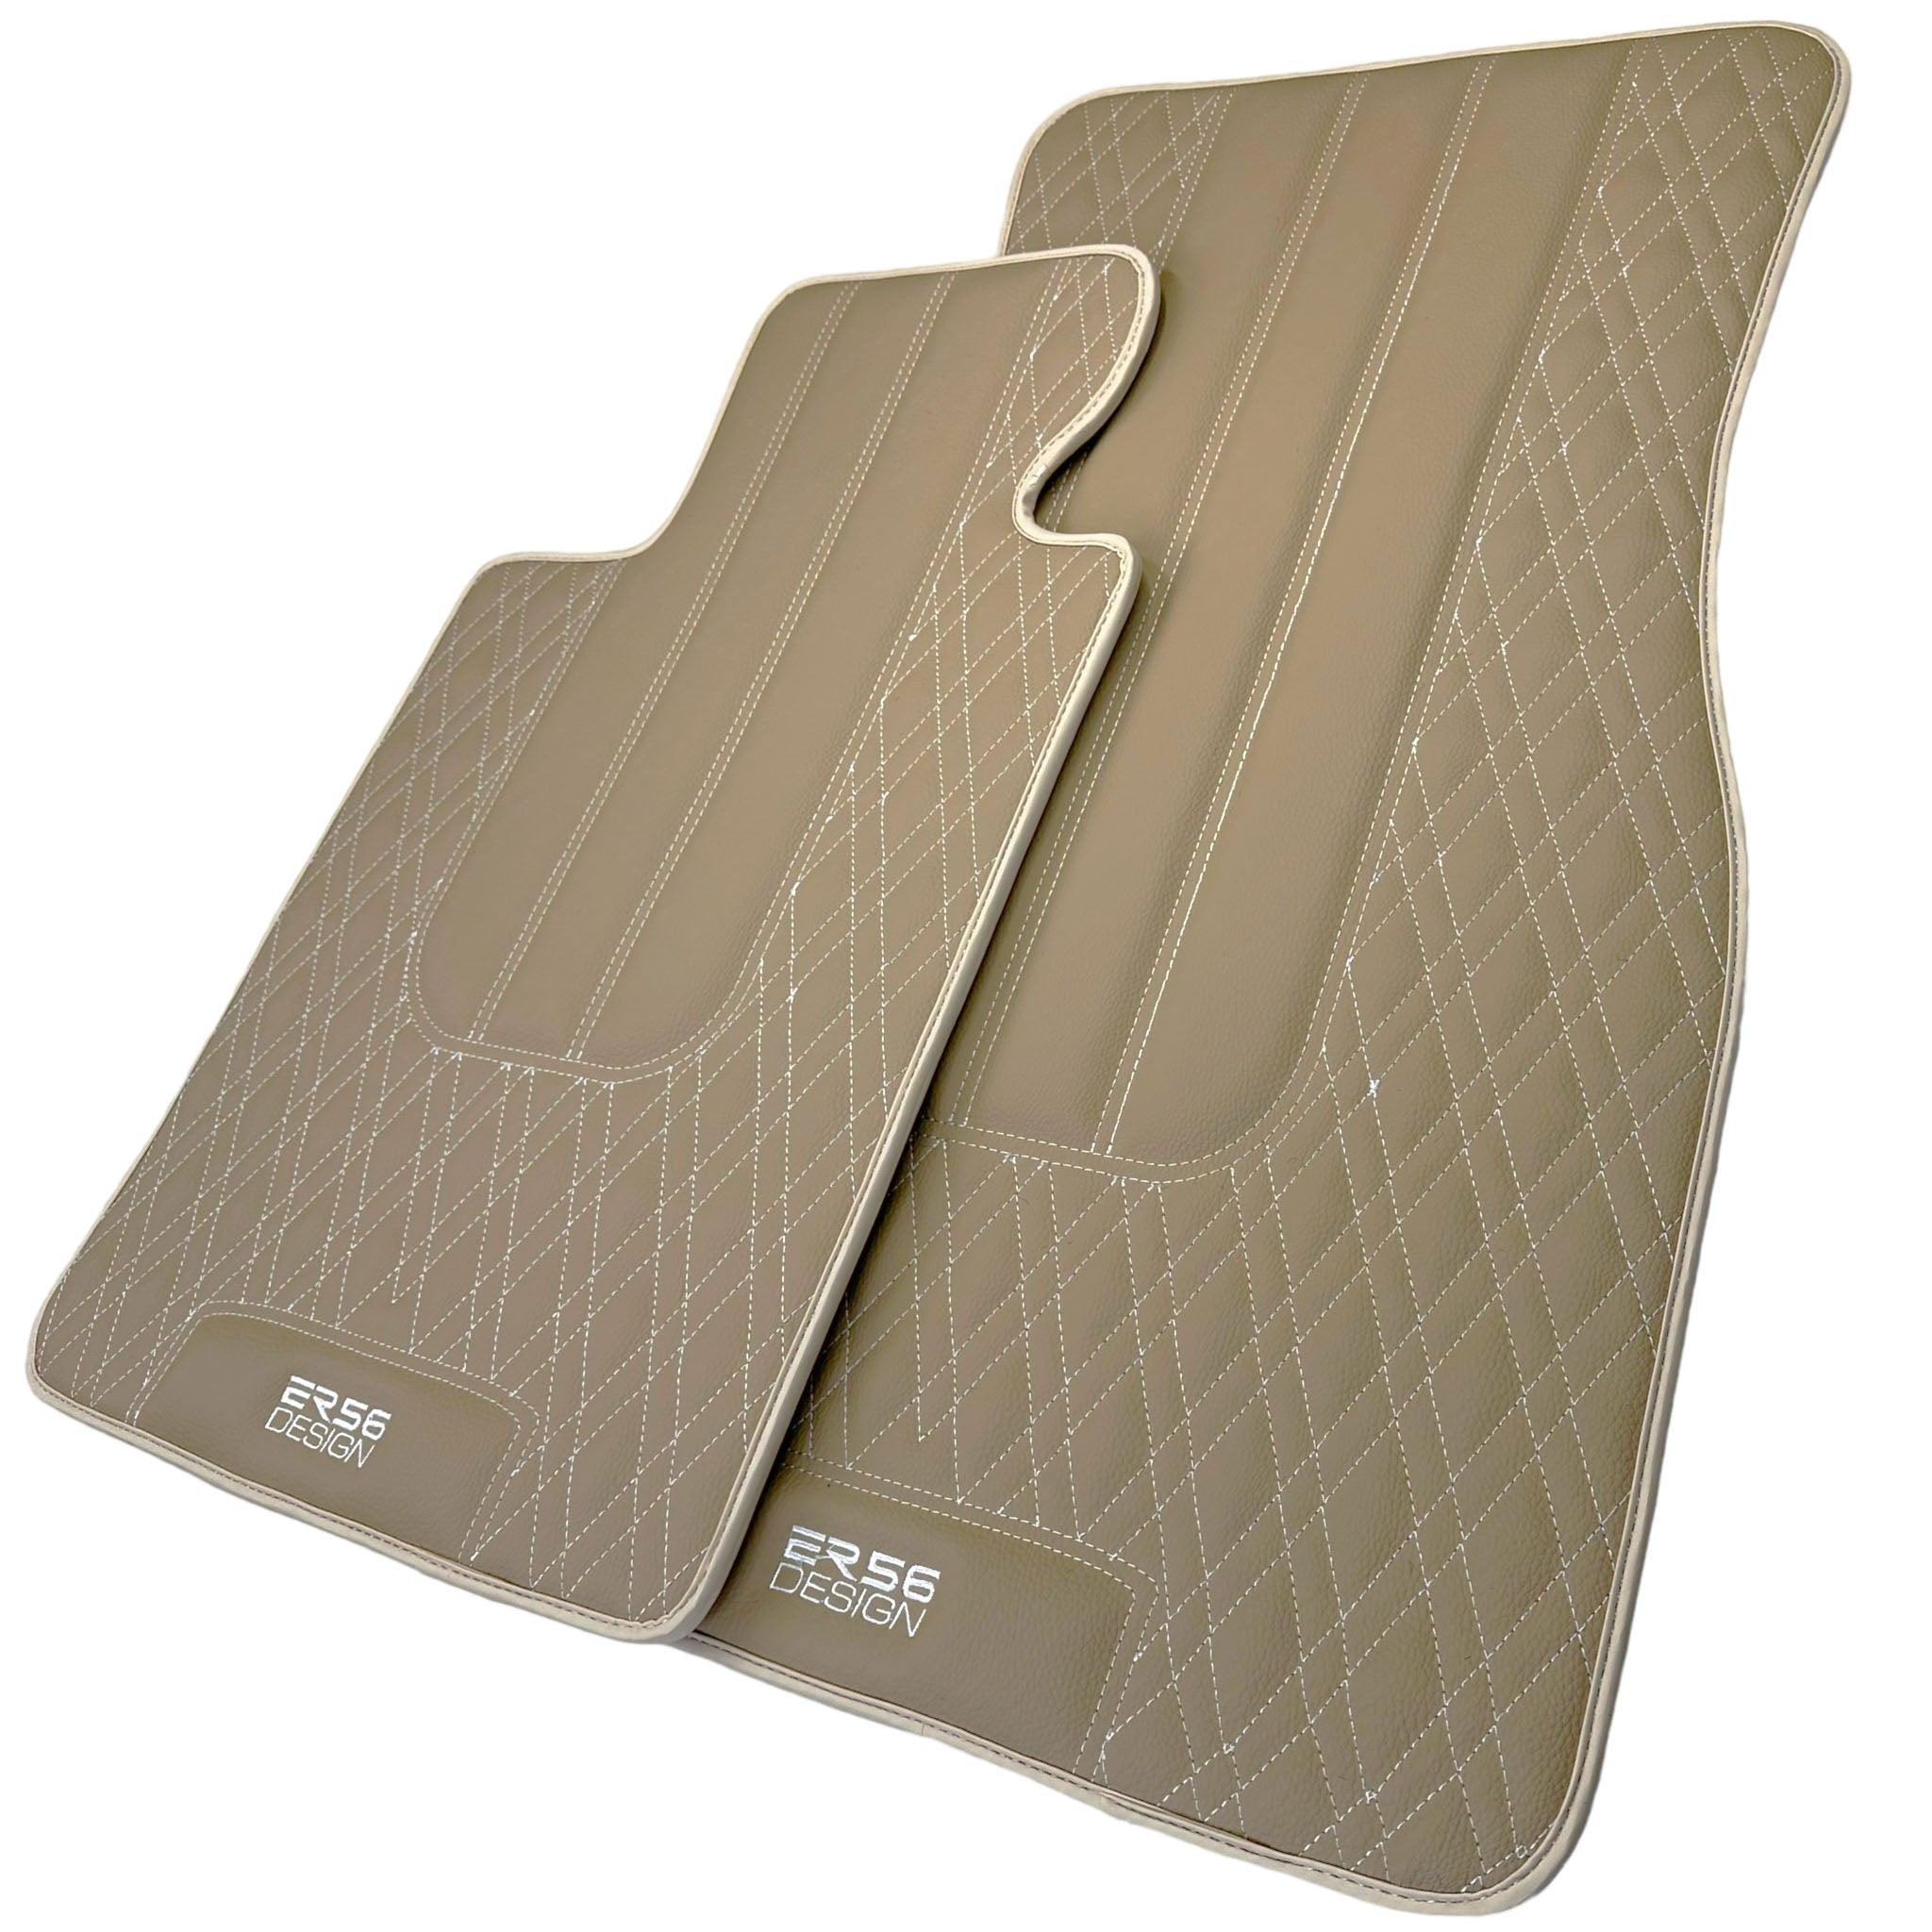 Beige Leather Floor Mats For BMW 7 Series E38 Long | Fighter Jet Edition